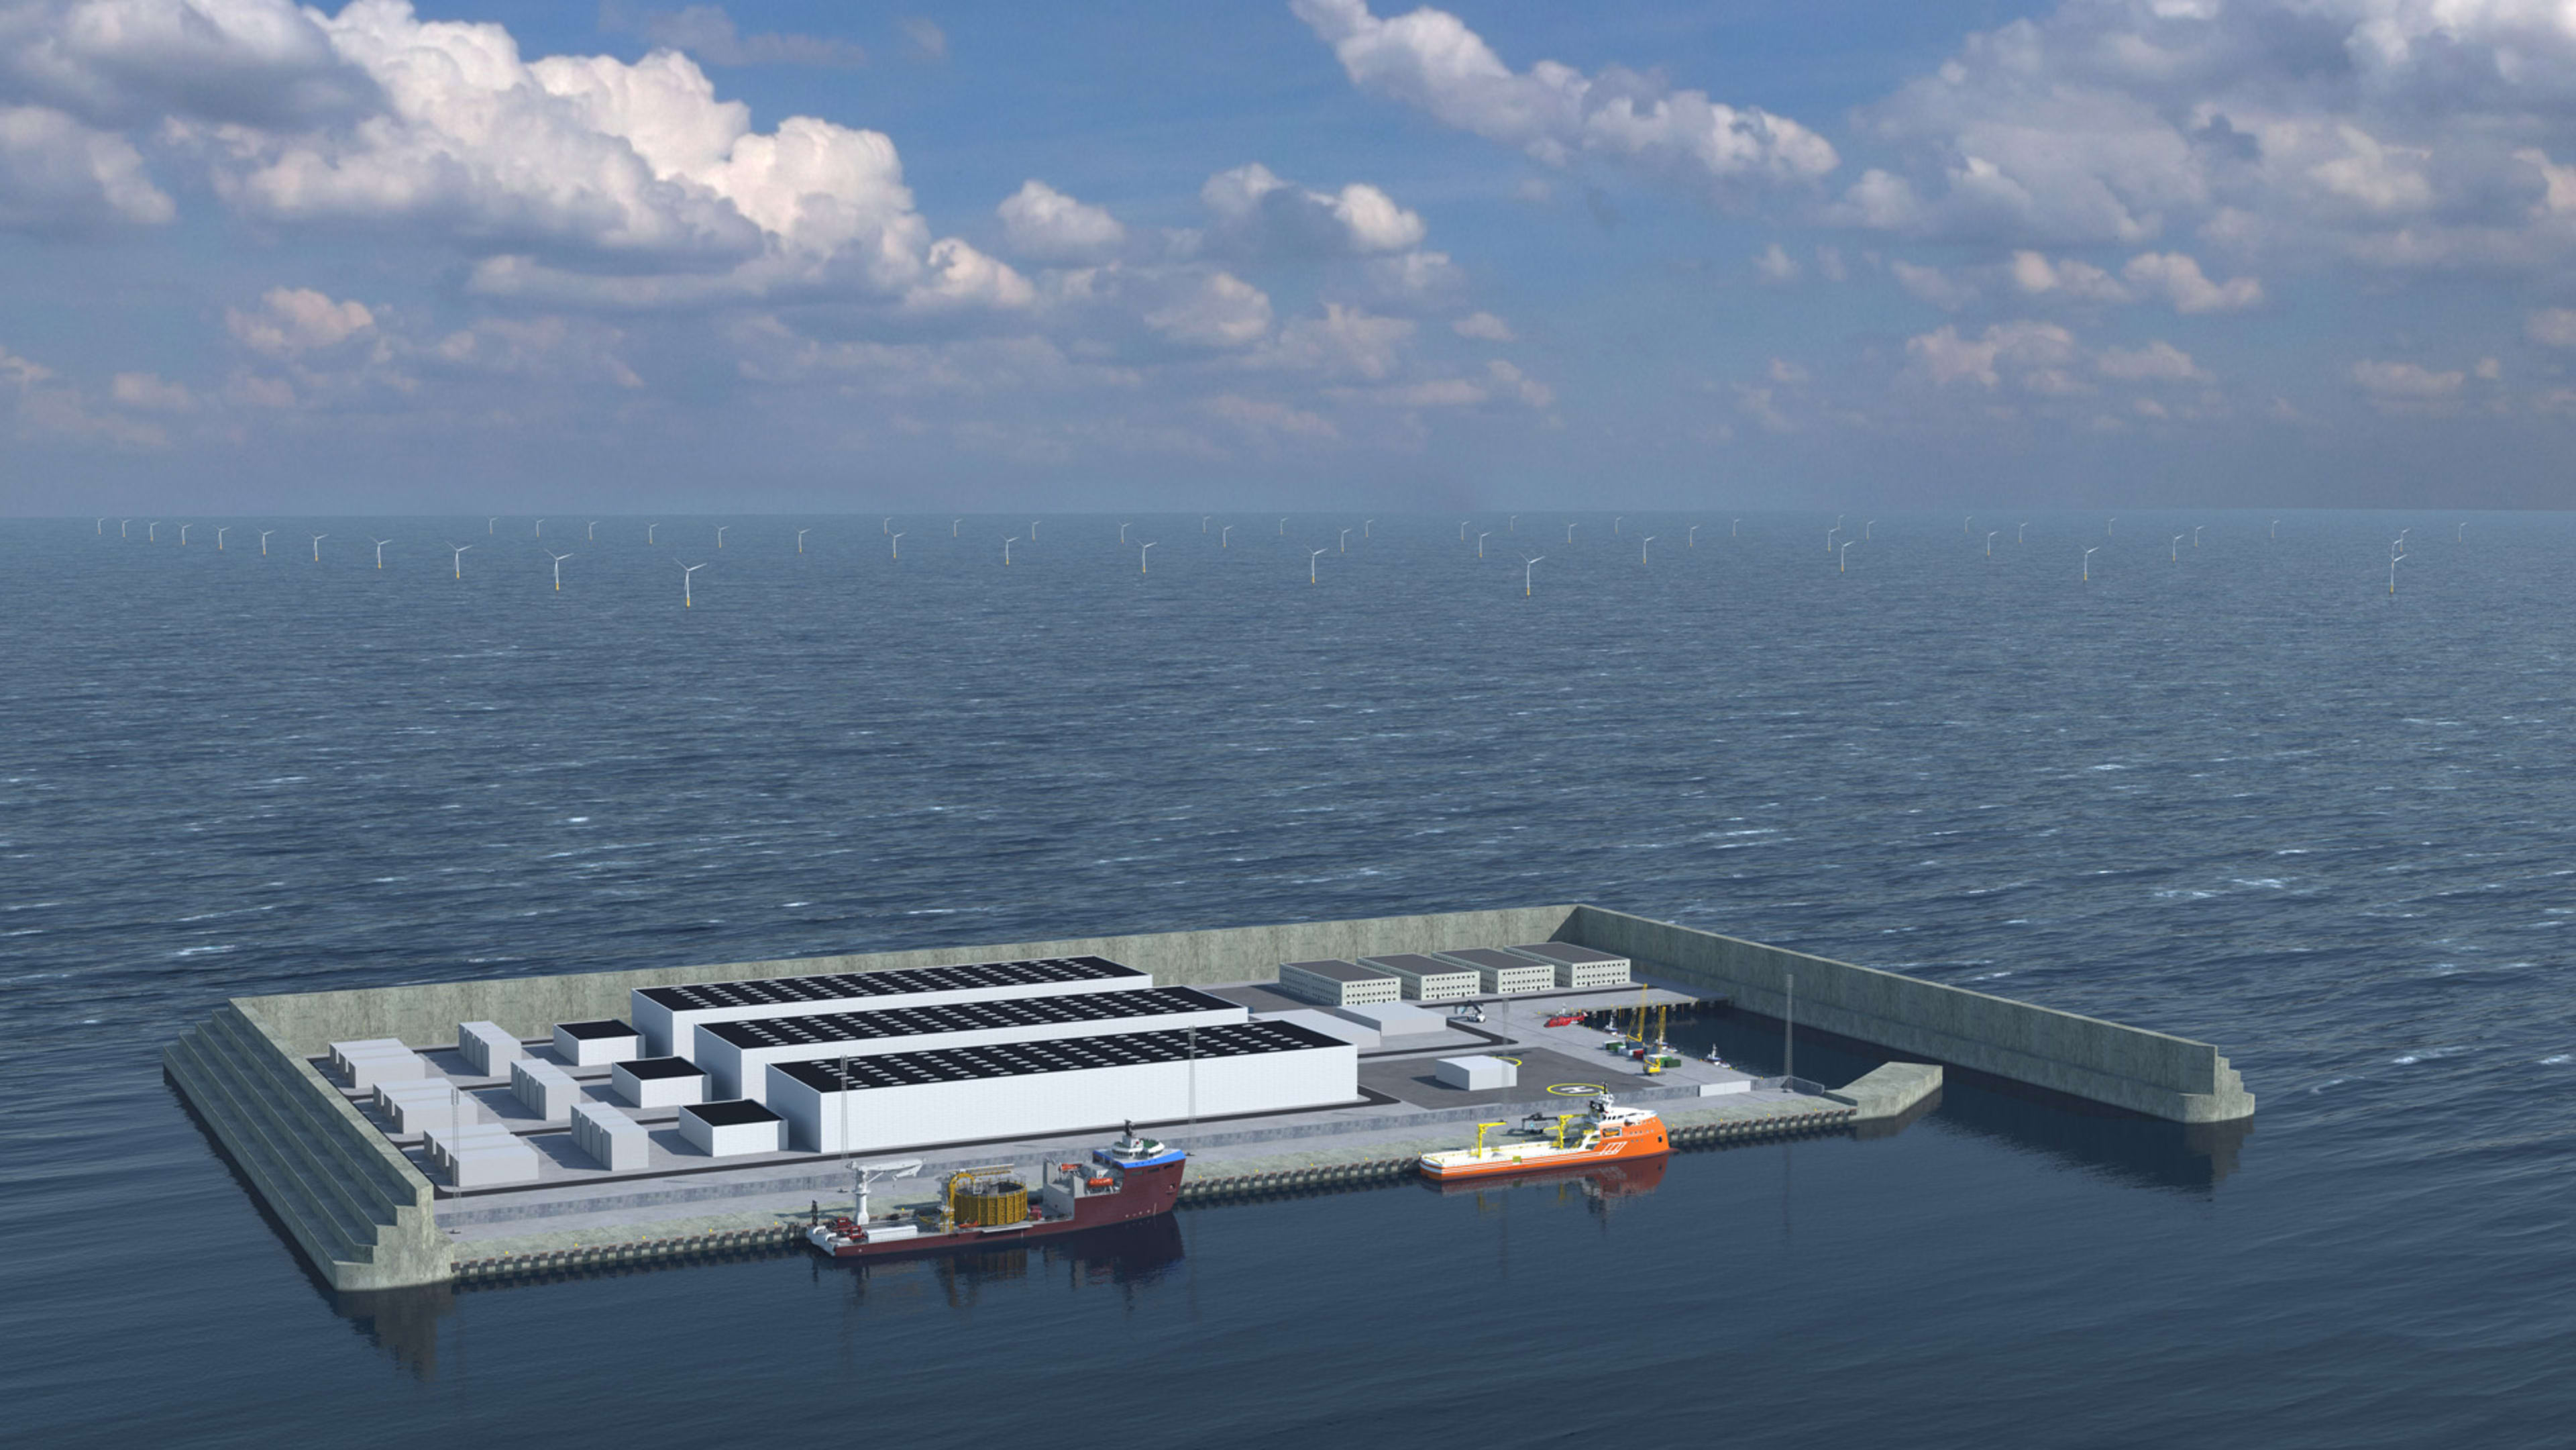 Denmark is building an artificial island to house the world’s first clean energy hub